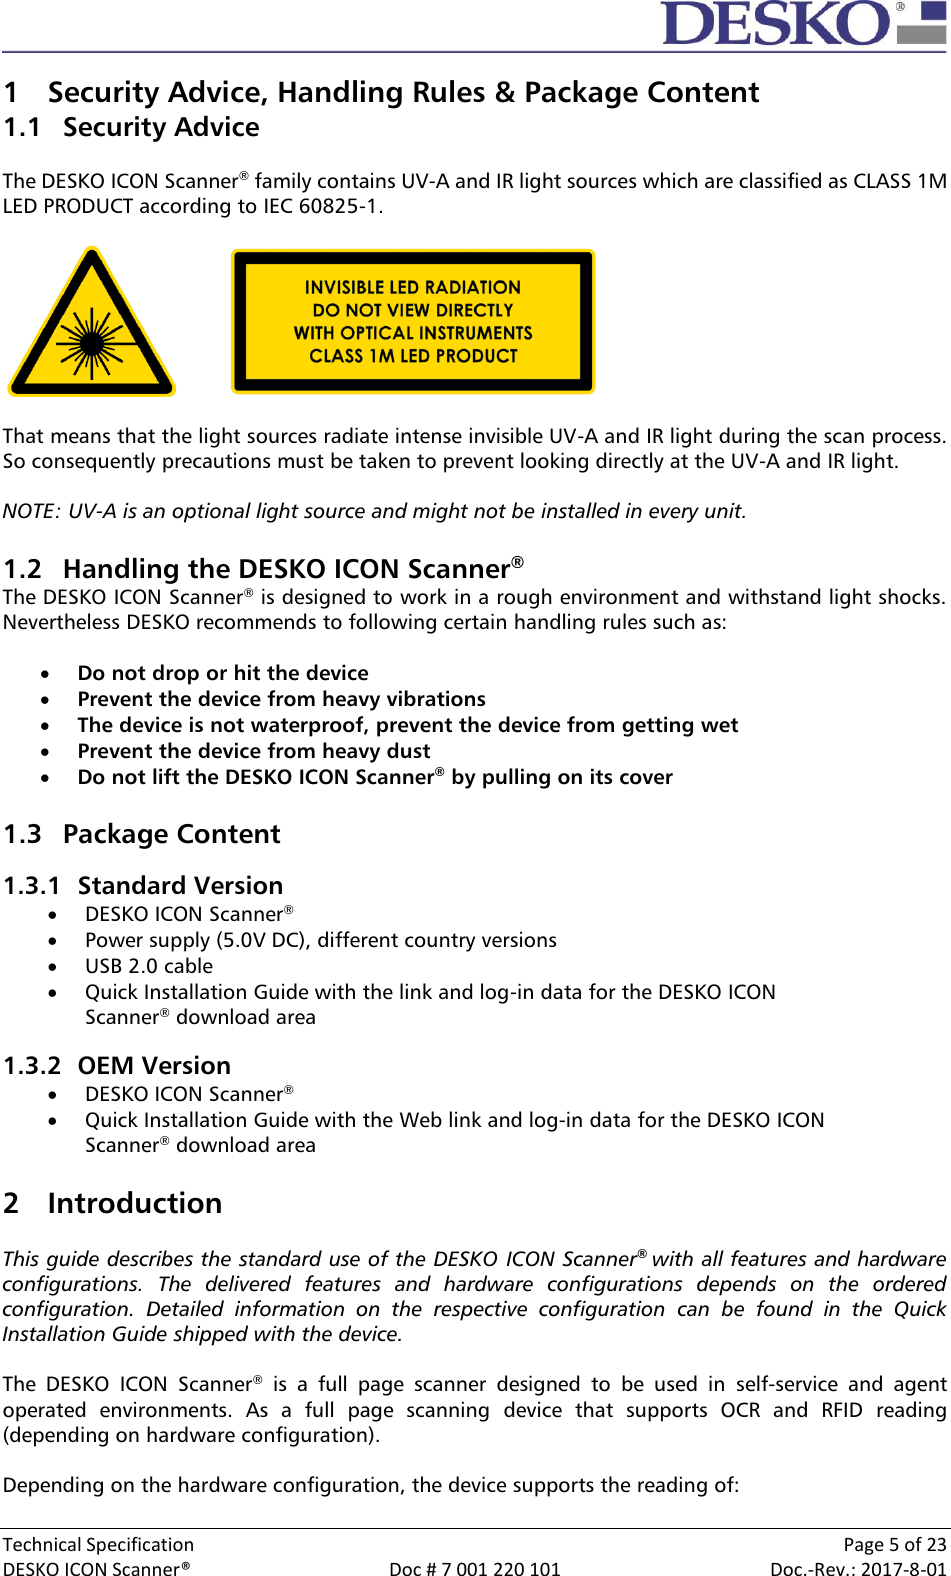  Technical Specification    Page 5 of 23 DESKO ICON Scanner®  Doc # 7 001 220 101  Doc.-Rev.: 2017-8-01  1 Security Advice, Handling Rules &amp; Package Content 1.1 Security Advice  The DESKO ICON Scanner® family contains UV-A and IR light sources which are classified as CLASS 1M LED PRODUCT according to IEC 60825-1.      That means that the light sources radiate intense invisible UV-A and IR light during the scan process. So consequently precautions must be taken to prevent looking directly at the UV-A and IR light.   NOTE: UV-A is an optional light source and might not be installed in every unit.   1.2 Handling the DESKO ICON Scanner® The DESKO ICON Scanner® is designed to work in a rough environment and withstand light shocks. Nevertheless DESKO recommends to following certain handling rules such as:   Do not drop or hit the device  Prevent the device from heavy vibrations  The device is not waterproof, prevent the device from getting wet  Prevent the device from heavy dust  Do not lift the DESKO ICON Scanner® by pulling on its cover  1.3 Package Content 1.3.1 Standard Version  DESKO ICON Scanner®  Power supply (5.0V DC), different country versions  USB 2.0 cable  Quick Installation Guide with the link and log-in data for the DESKO ICON Scanner® download area 1.3.2 OEM Version  DESKO ICON Scanner®  Quick Installation Guide with the Web link and log-in data for the DESKO ICON Scanner® download area  2 Introduction  This guide describes the standard use of the DESKO ICON Scanner®  with all features and hardware configurations.  The  delivered  features  and  hardware  configurations  depends  on  the  ordered configuration.  Detailed  information  on  the  respective  configuration  can  be  found  in  the  Quick Installation Guide shipped with the device.  The  DESKO  ICON  Scanner®  is  a  full  page  scanner  designed  to  be  used  in  self-service  and  agent operated  environments.  As  a  full  page  scanning  device  that  supports  OCR  and  RFID  reading (depending on hardware configuration).   Depending on the hardware configuration, the device supports the reading of: 